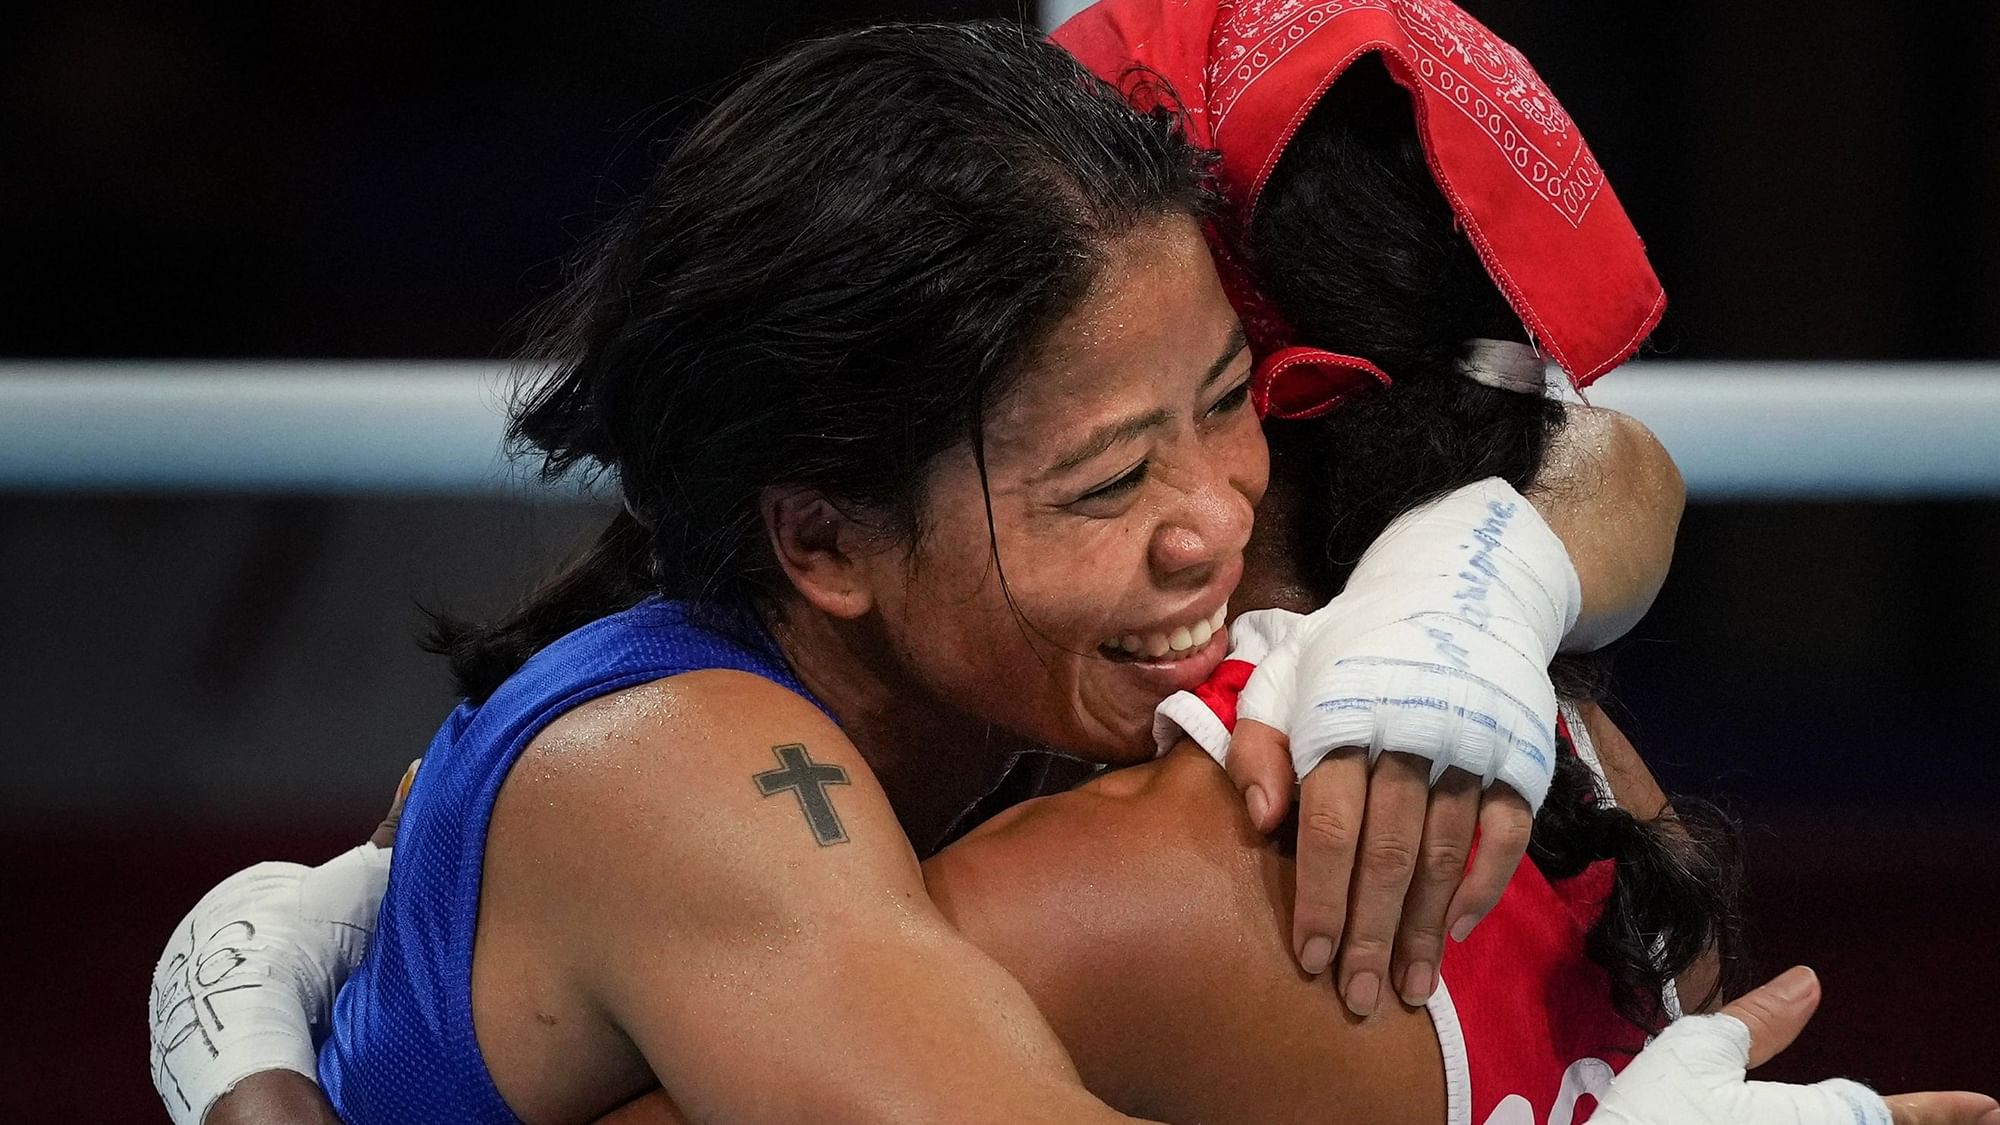 <div class="paragraphs"><p>MC Mary Kom embraces her opponent after the Round of 16 match at the 2020 Tokyo Olympics.</p></div>